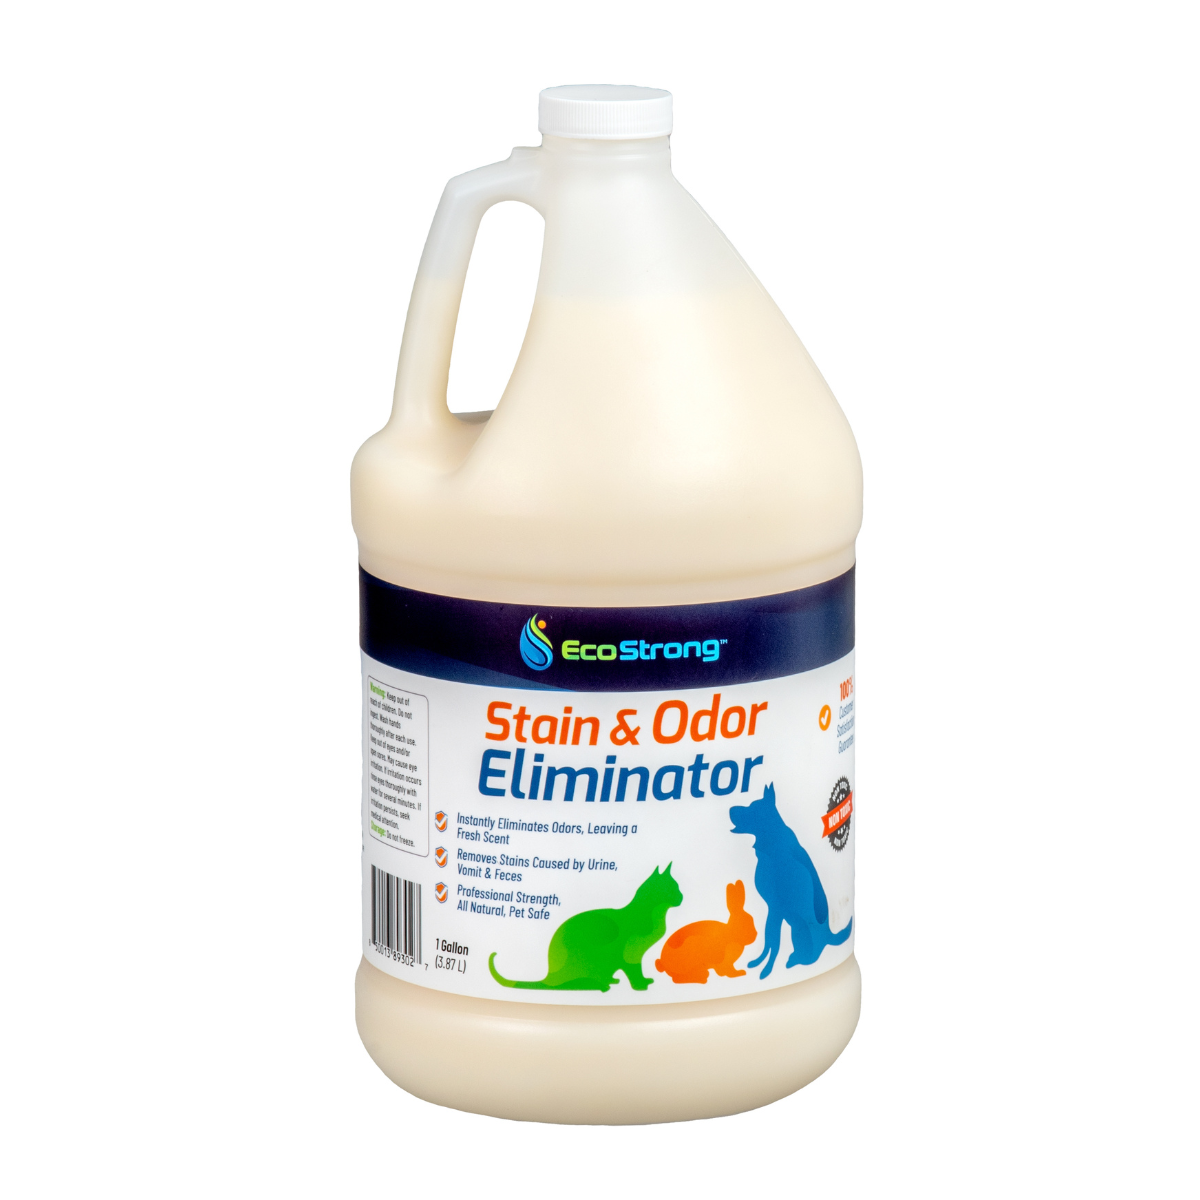 EcoStrong Pet Stain and Odor Eliminator 1 gallon #size_1-gallon-jug